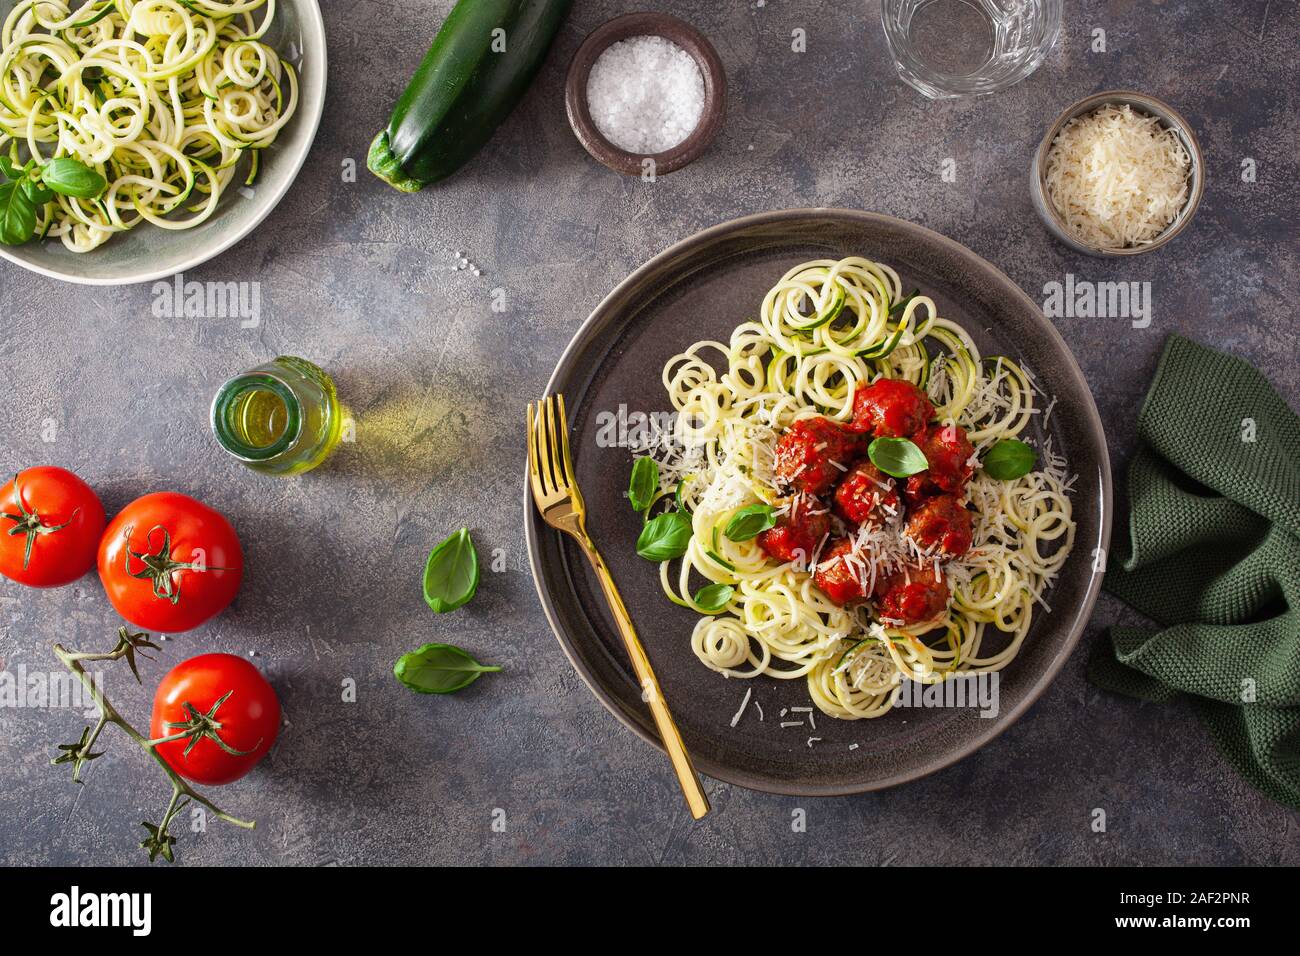 keto paleo diet zoodles spiralized zucchini noodles with meatballs and parmesan Stock Photo